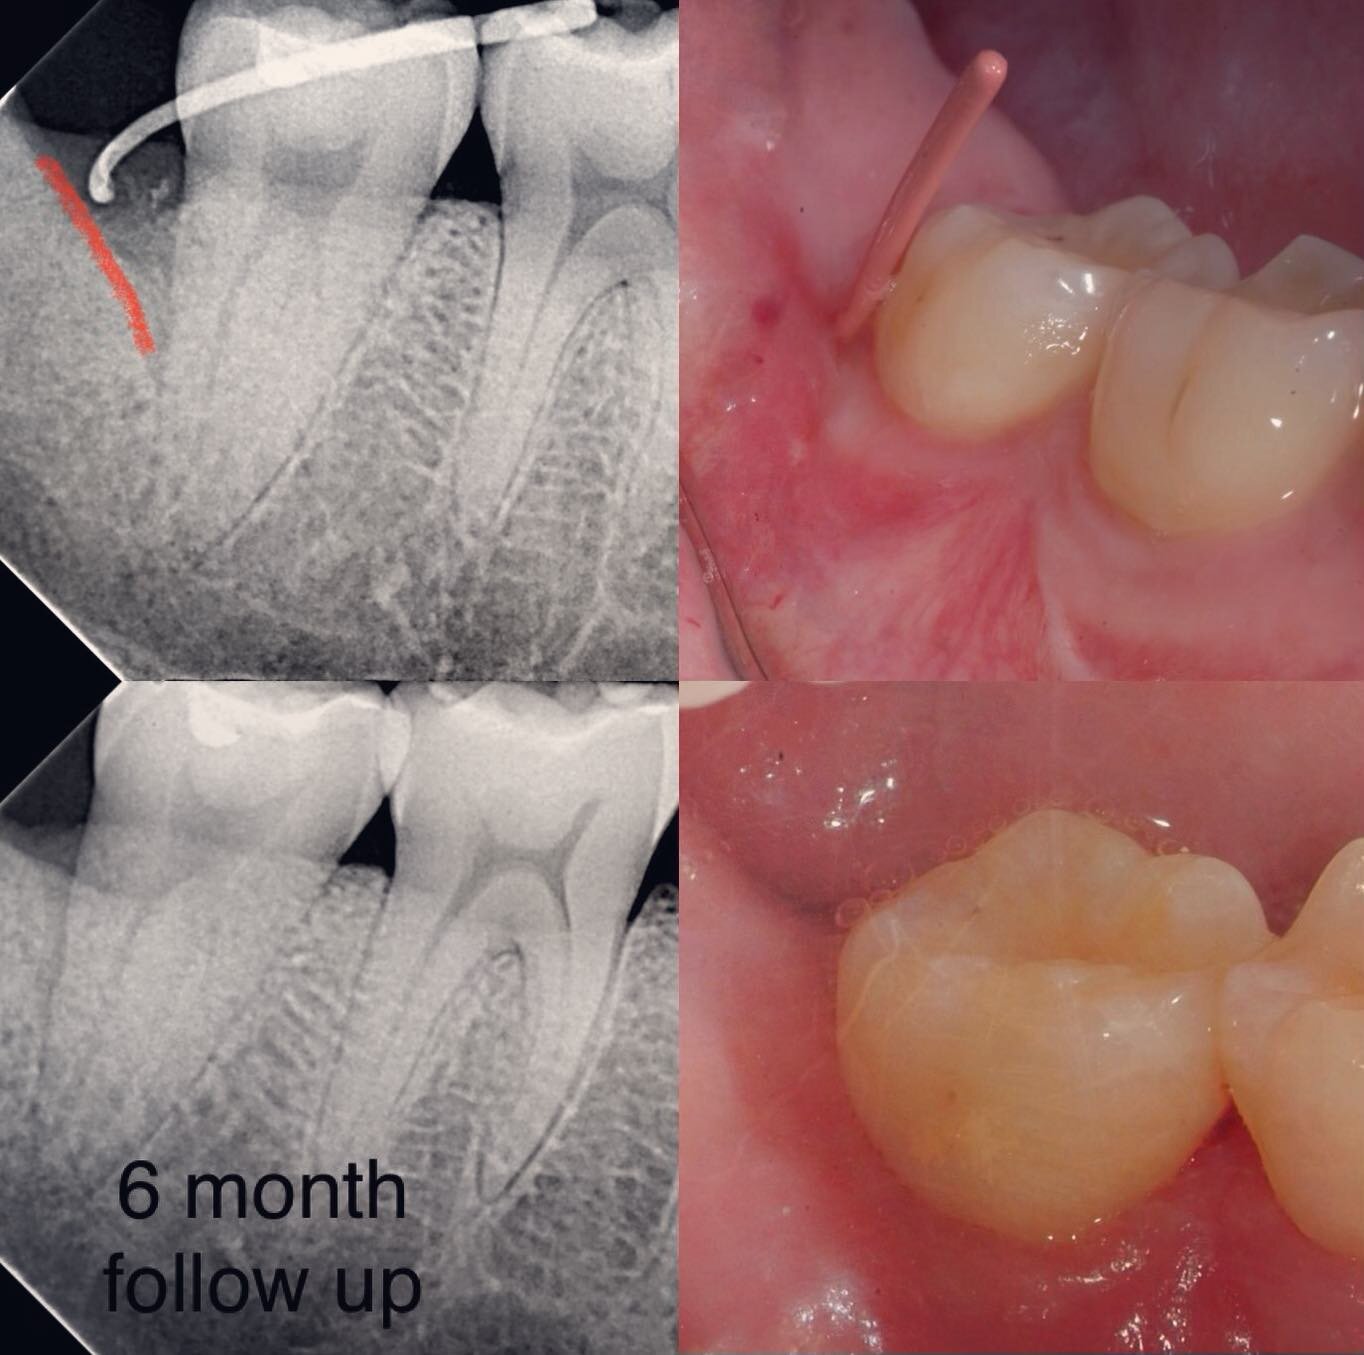 This patient was referred for localized deep probing, a bony crater and inflammation of #31  distal following removal of an impacted #32 (wisdom tooth). At the time of the exam, a draining sinus tract was noted - see photo and x-ray with gutta percha